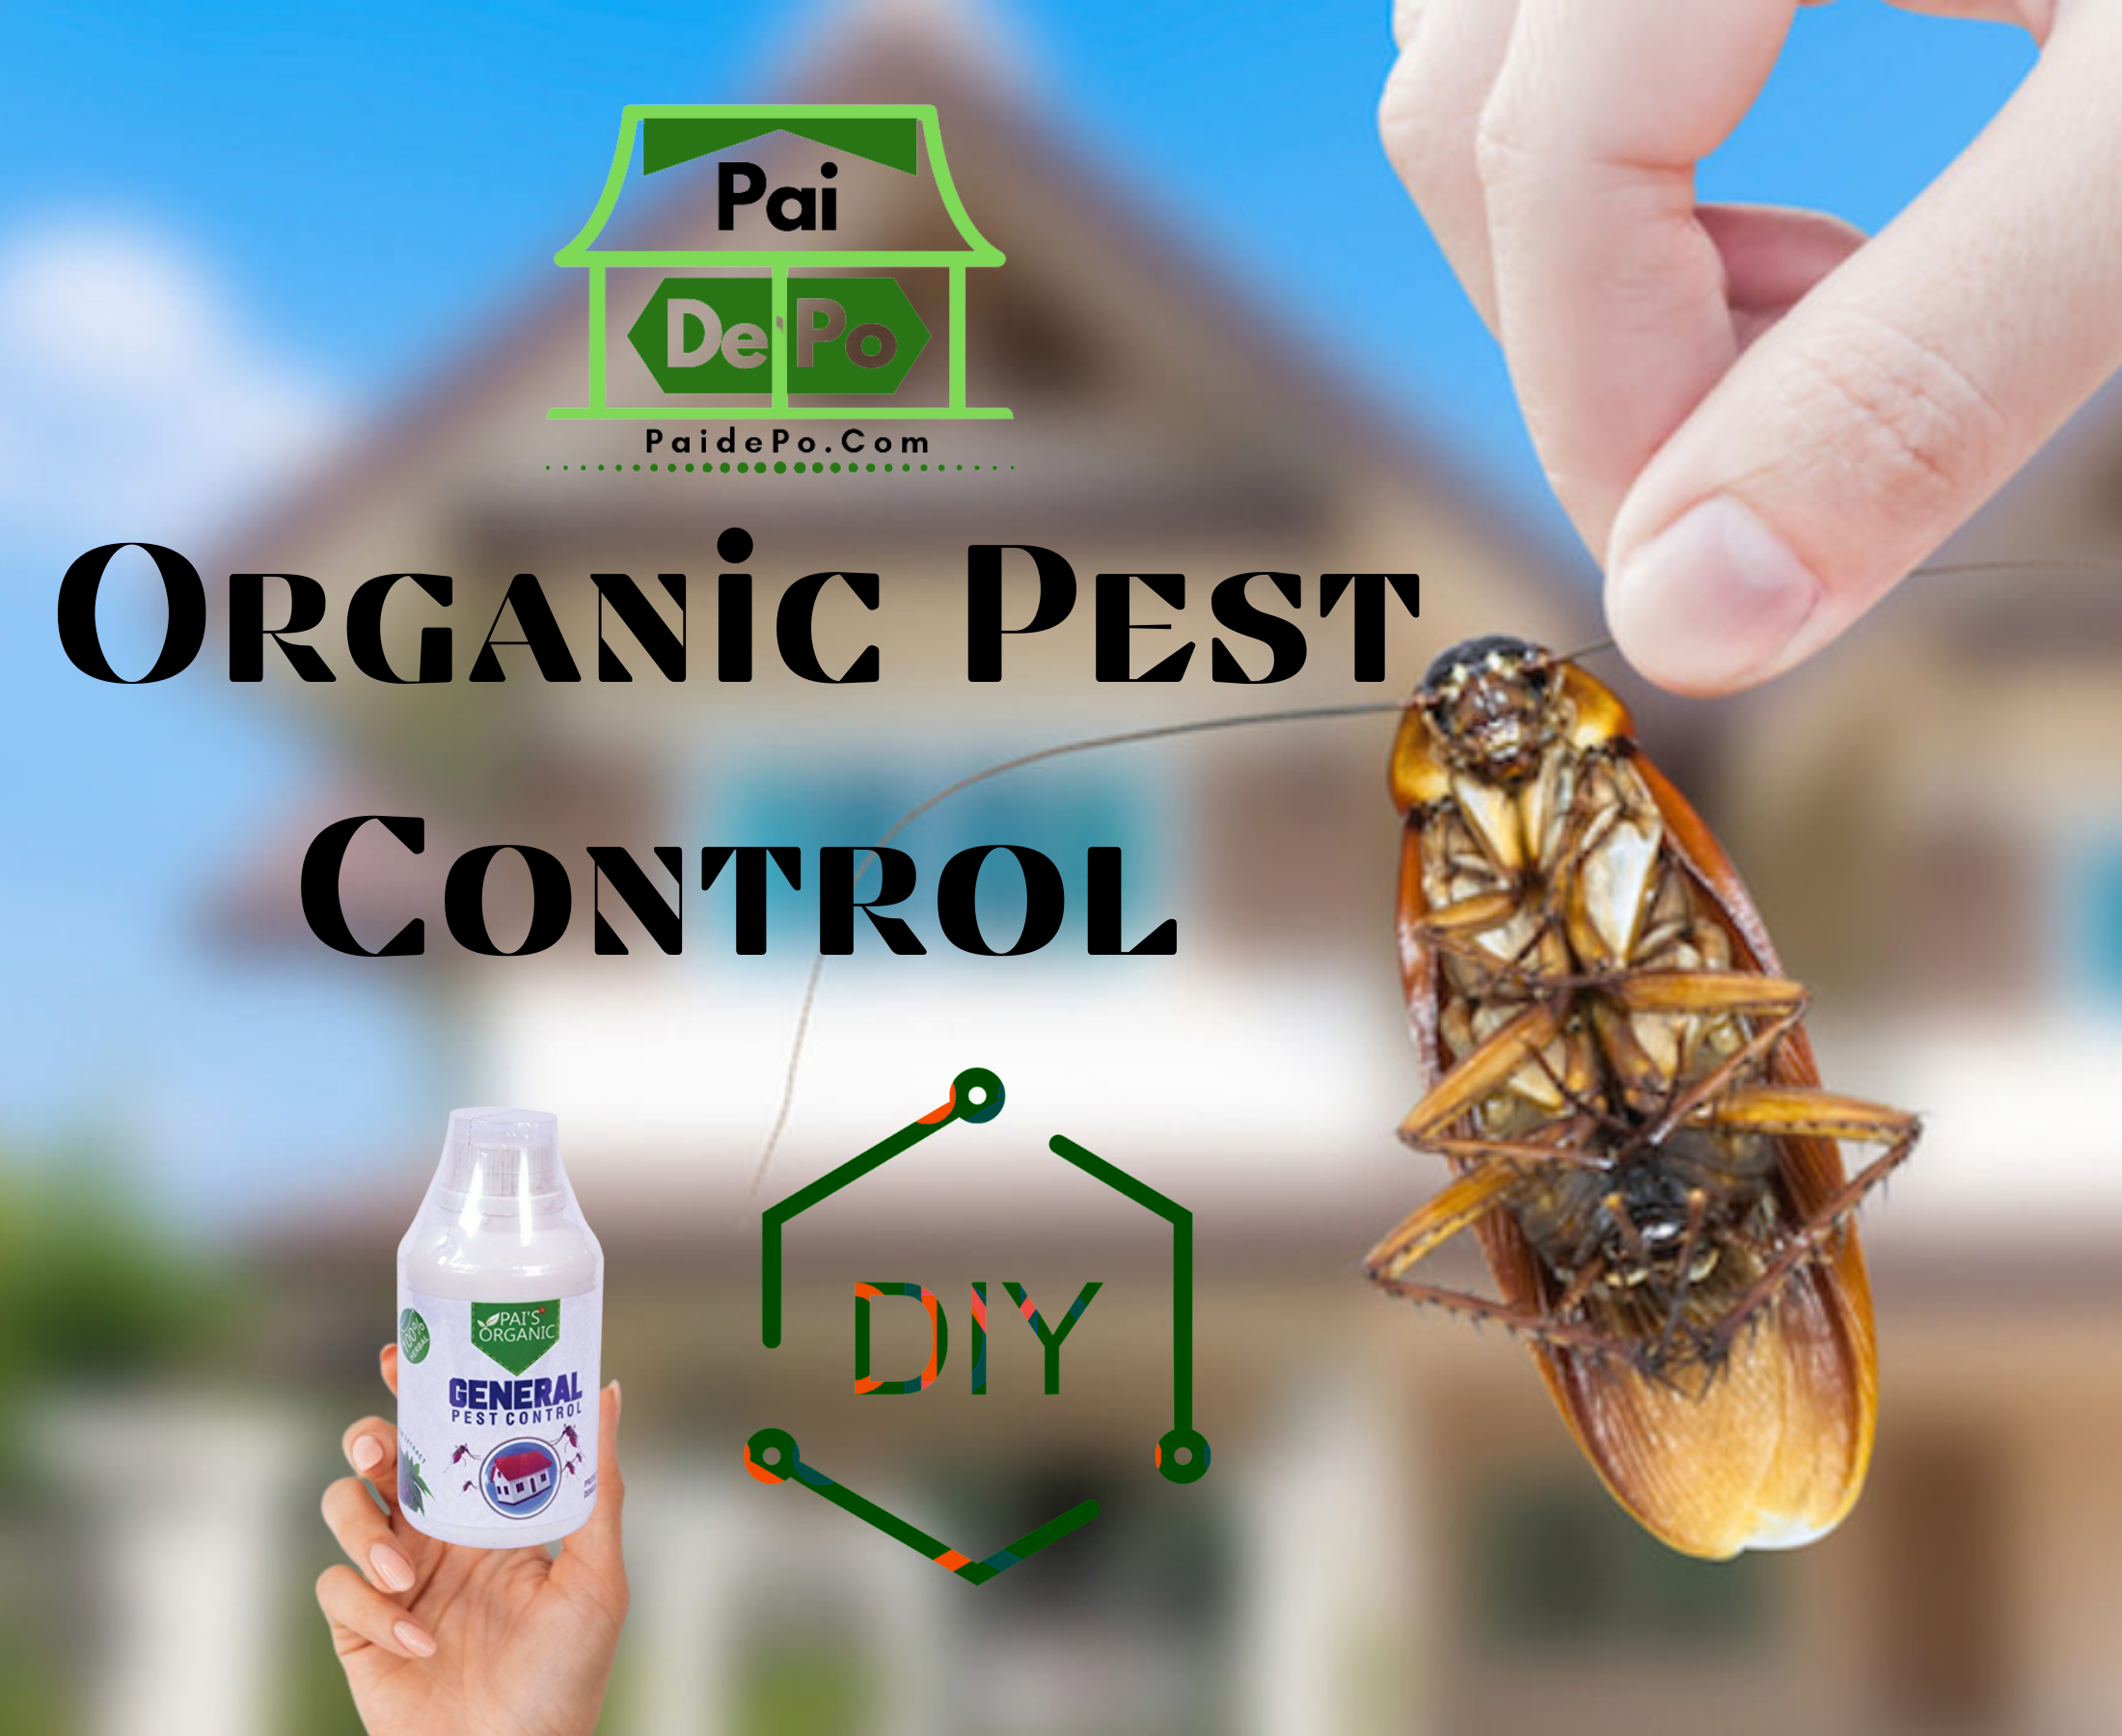 What are some best organic pest control methods?